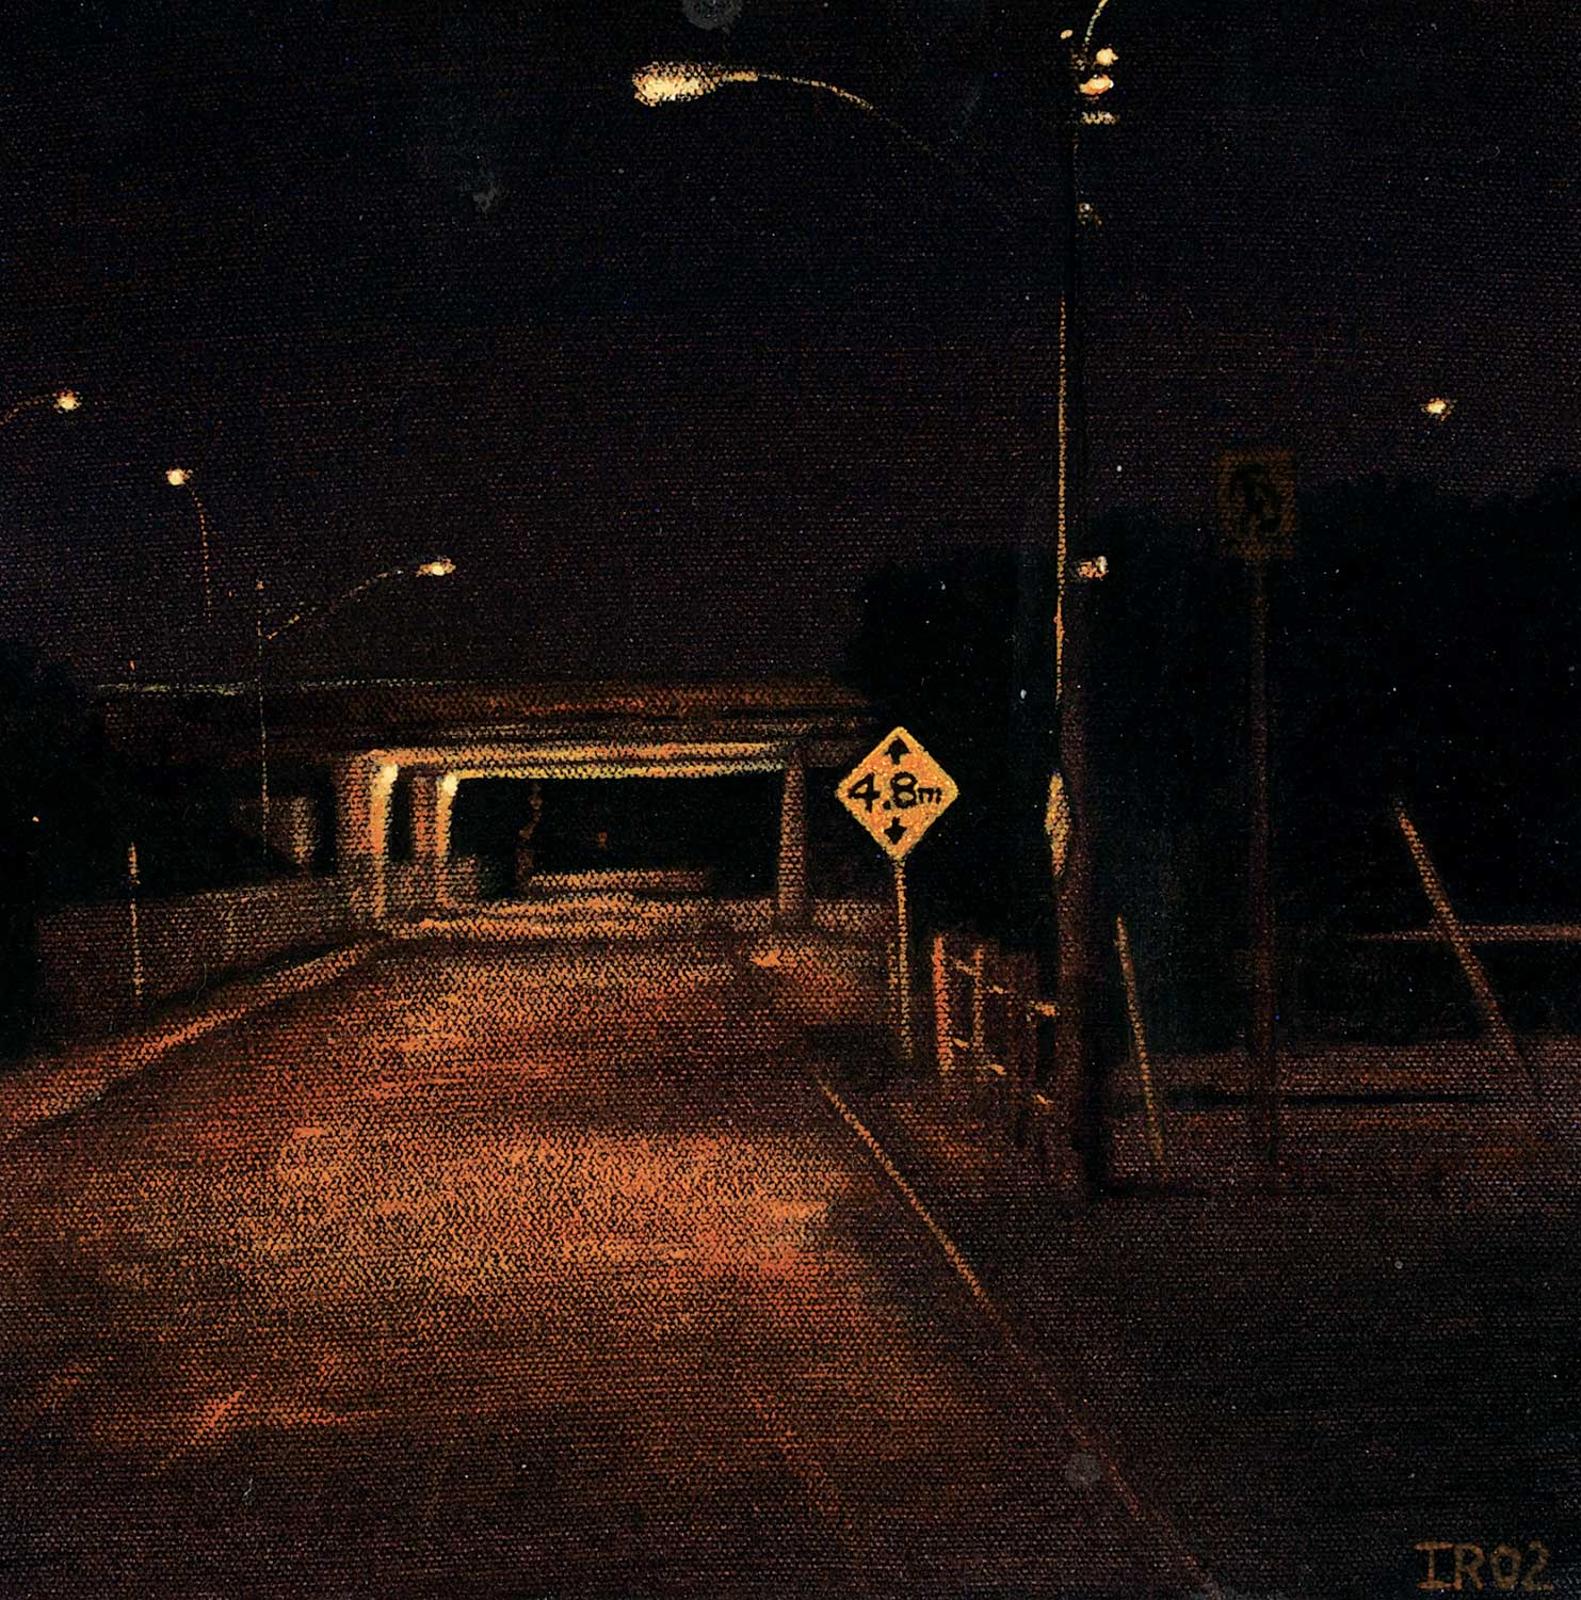 Ian Rawlinson - Untitled - Underpass Nocturne